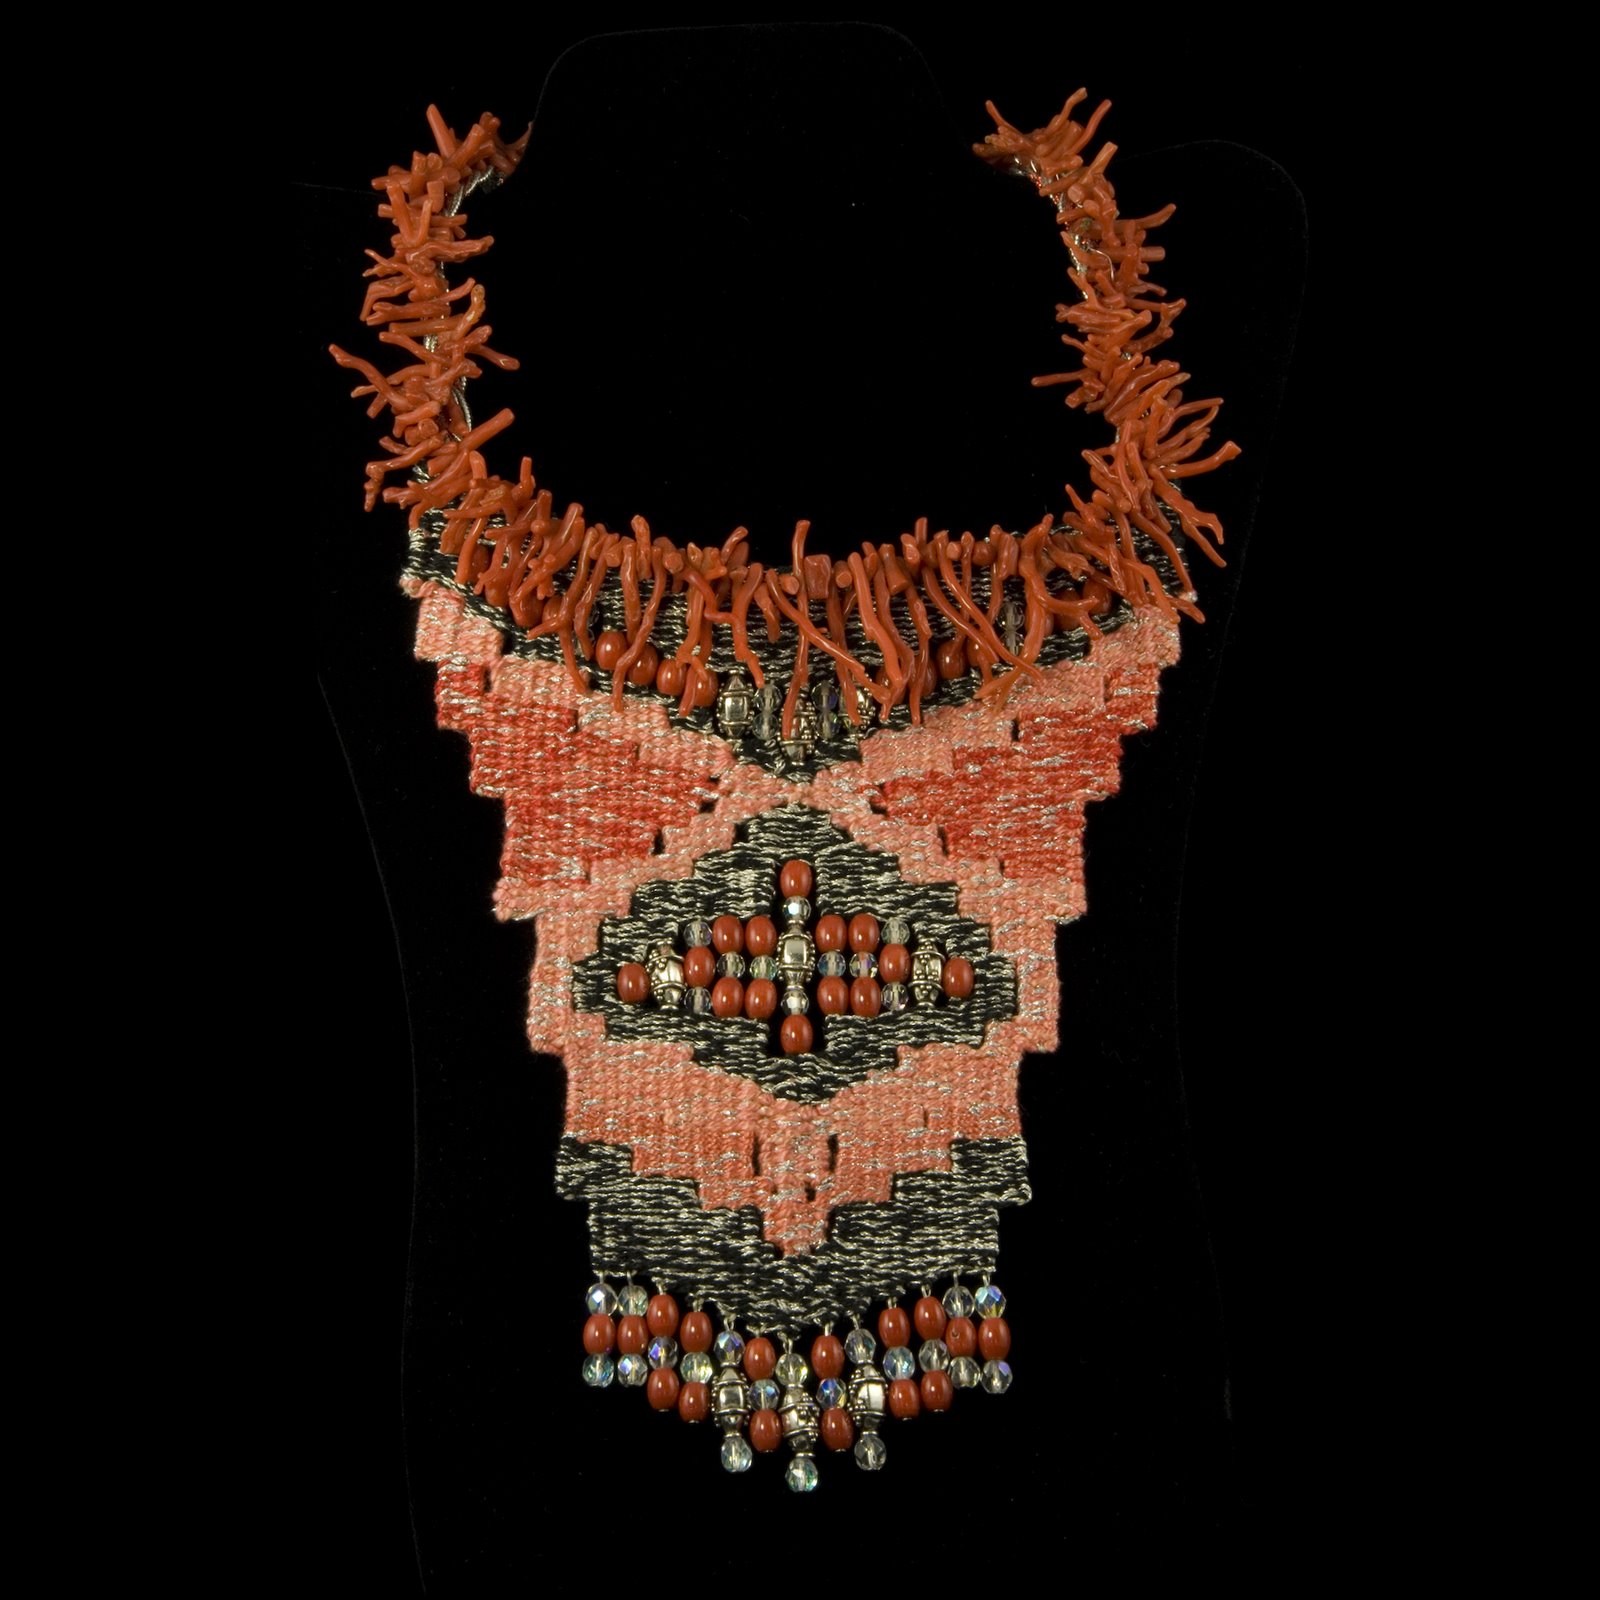 [woven+necklace+with+coral.jpg]